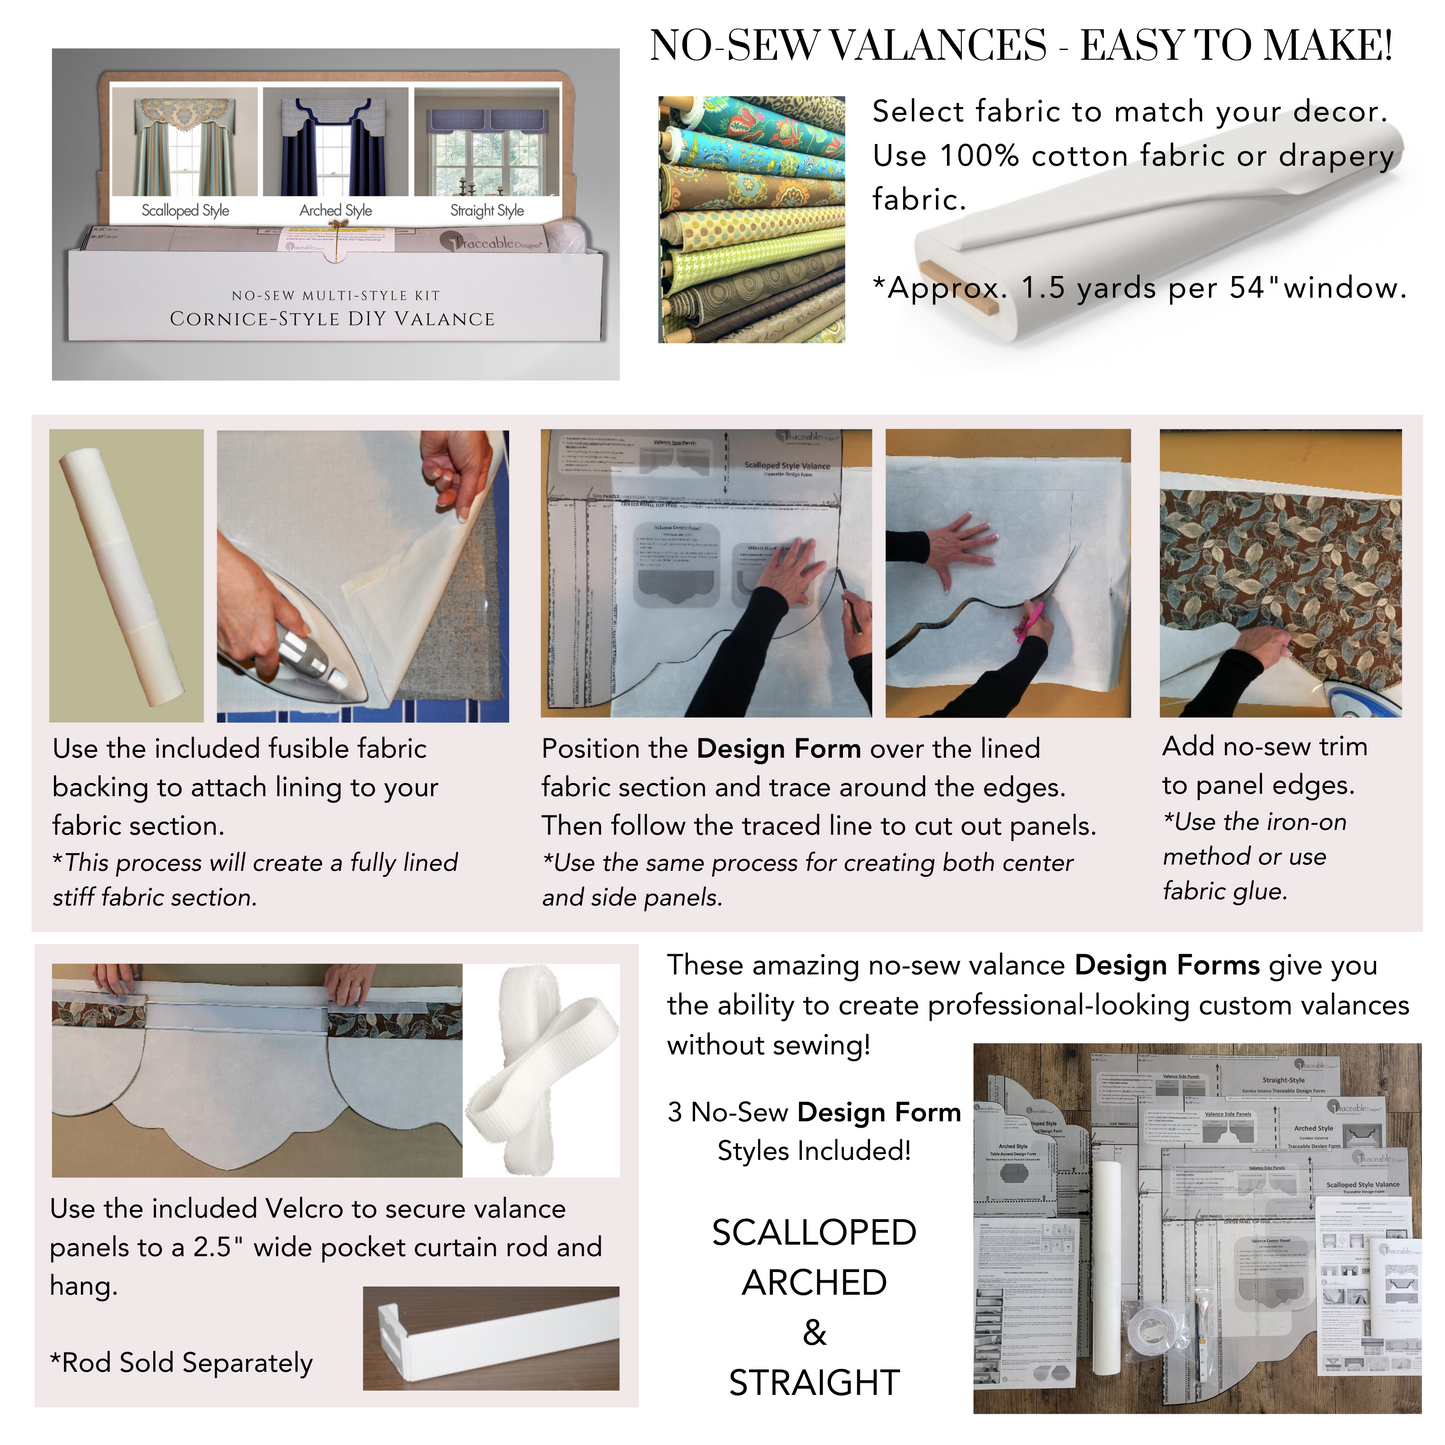 Traceable Designer multi-style no-sew cornice valance kit inlcudes traceable valance design forms used to make custom valances without sewing. Use a 2.5" wide pocket curtain rod.